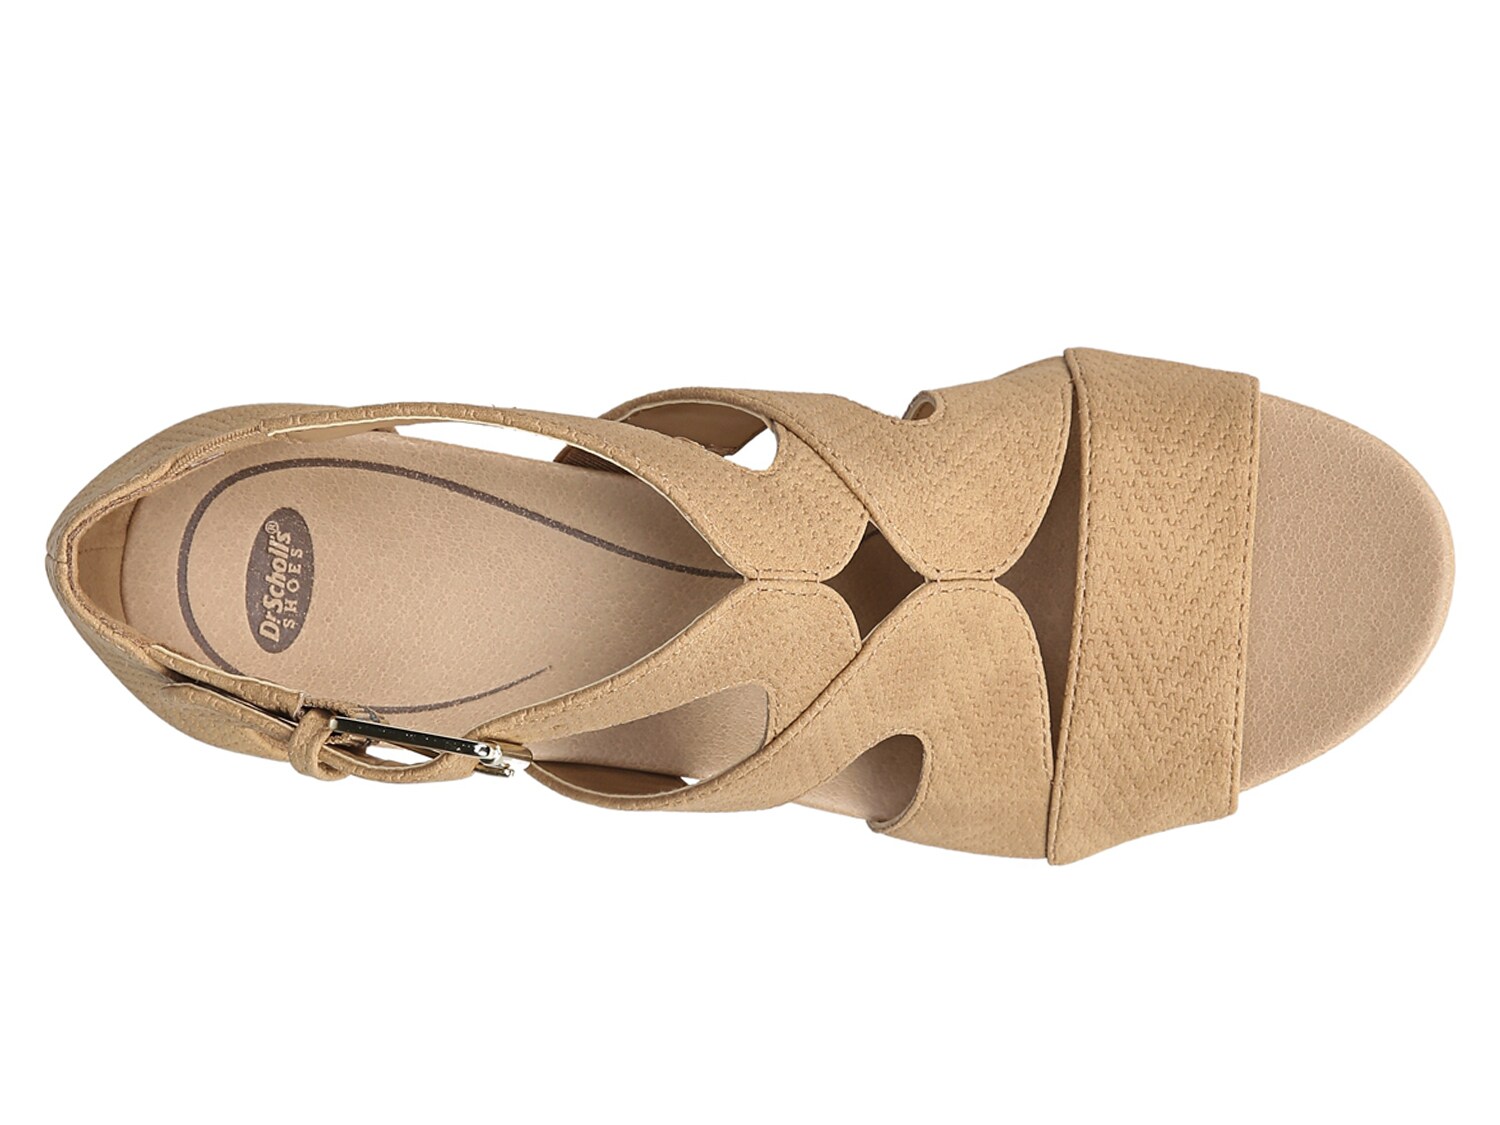 dr scholl's bailey wedge